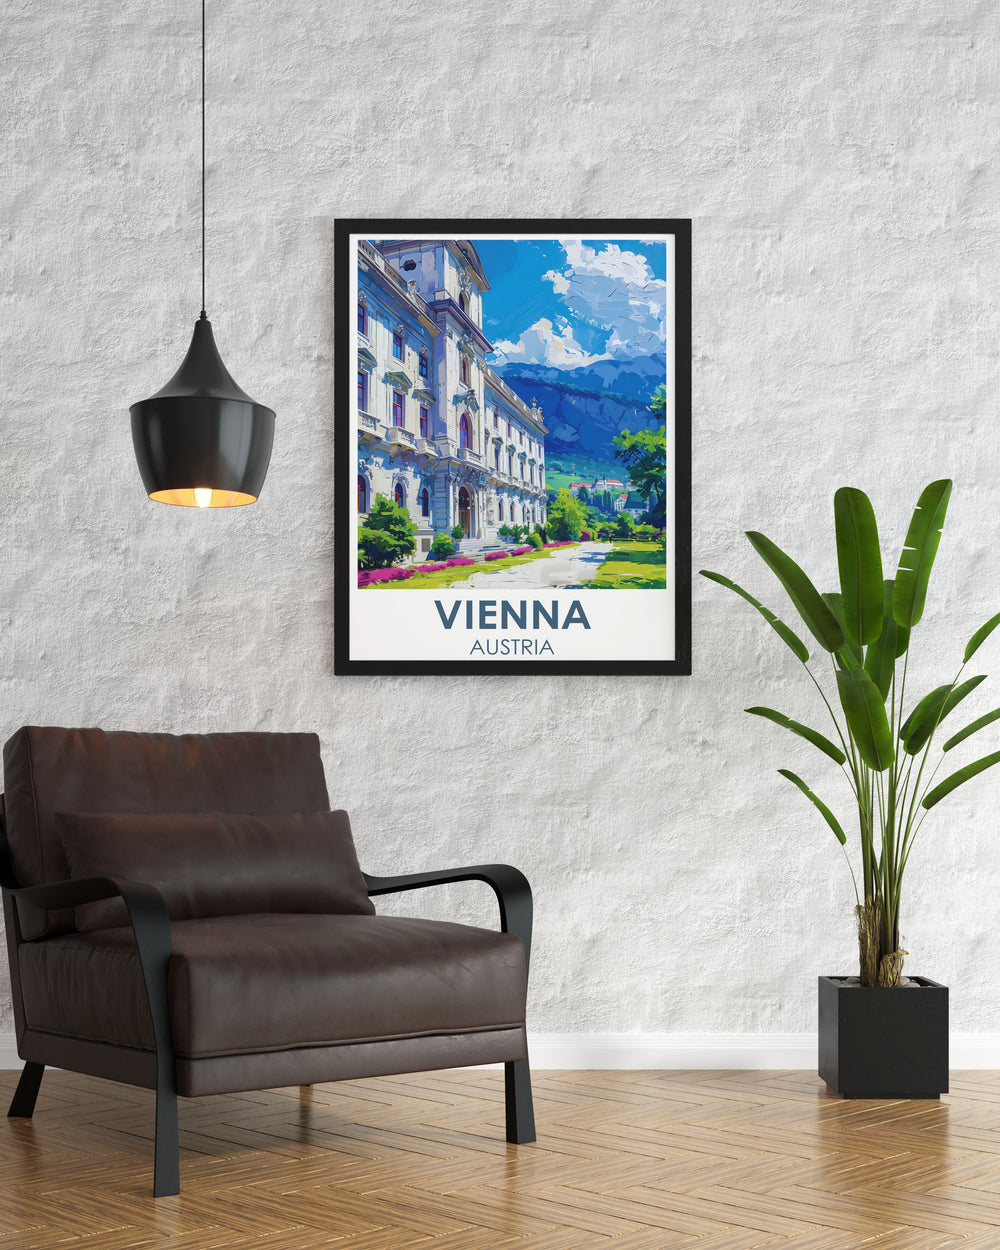 Captivating Vienna Poster of Belvedere Palace highlighting the beauty and grandeur of this historic landmark a perfect piece of wall art for celebrating Viennas rich cultural heritage and charm